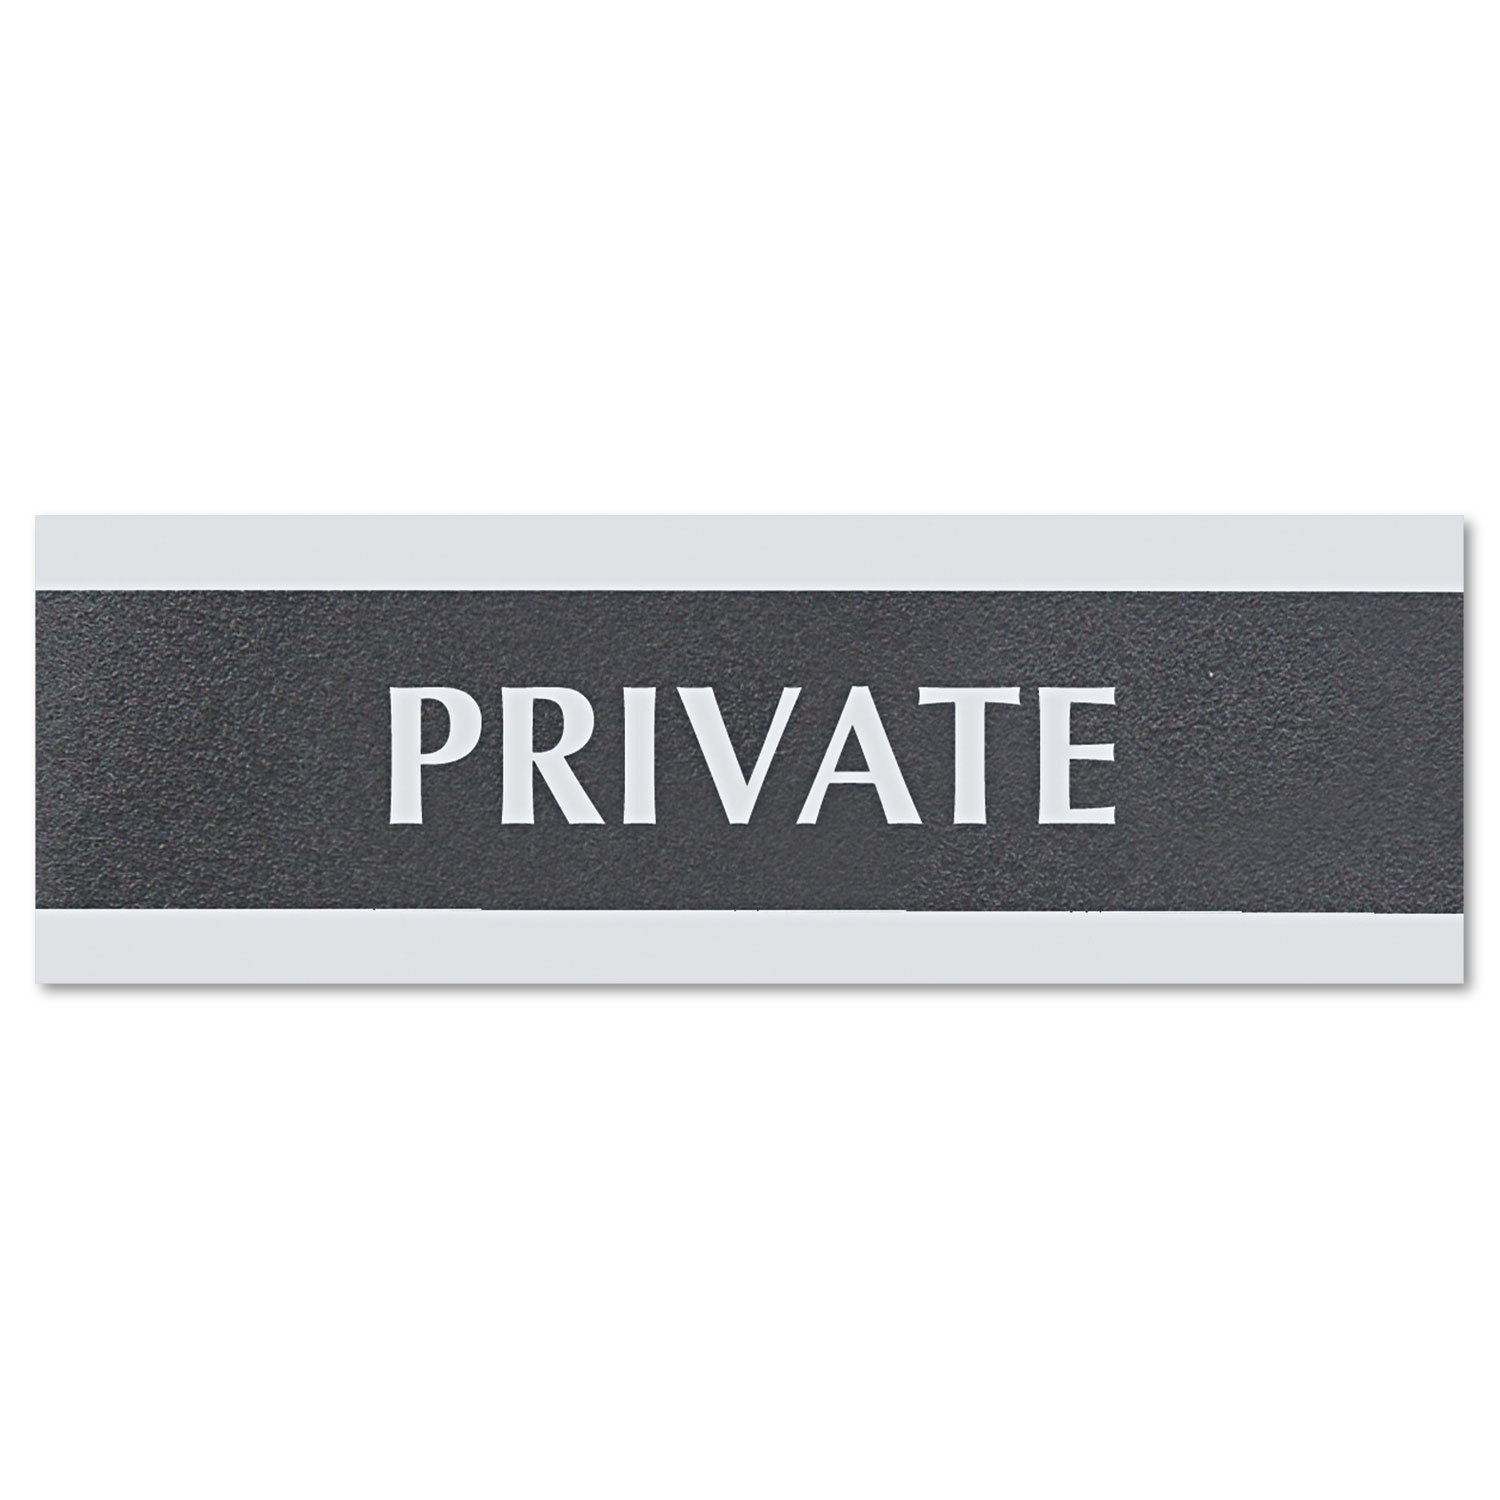  Headline Sign 4761 Century Series Office Sign, PRIVATE, 9 x 3, Black/Silver (USS4761) 